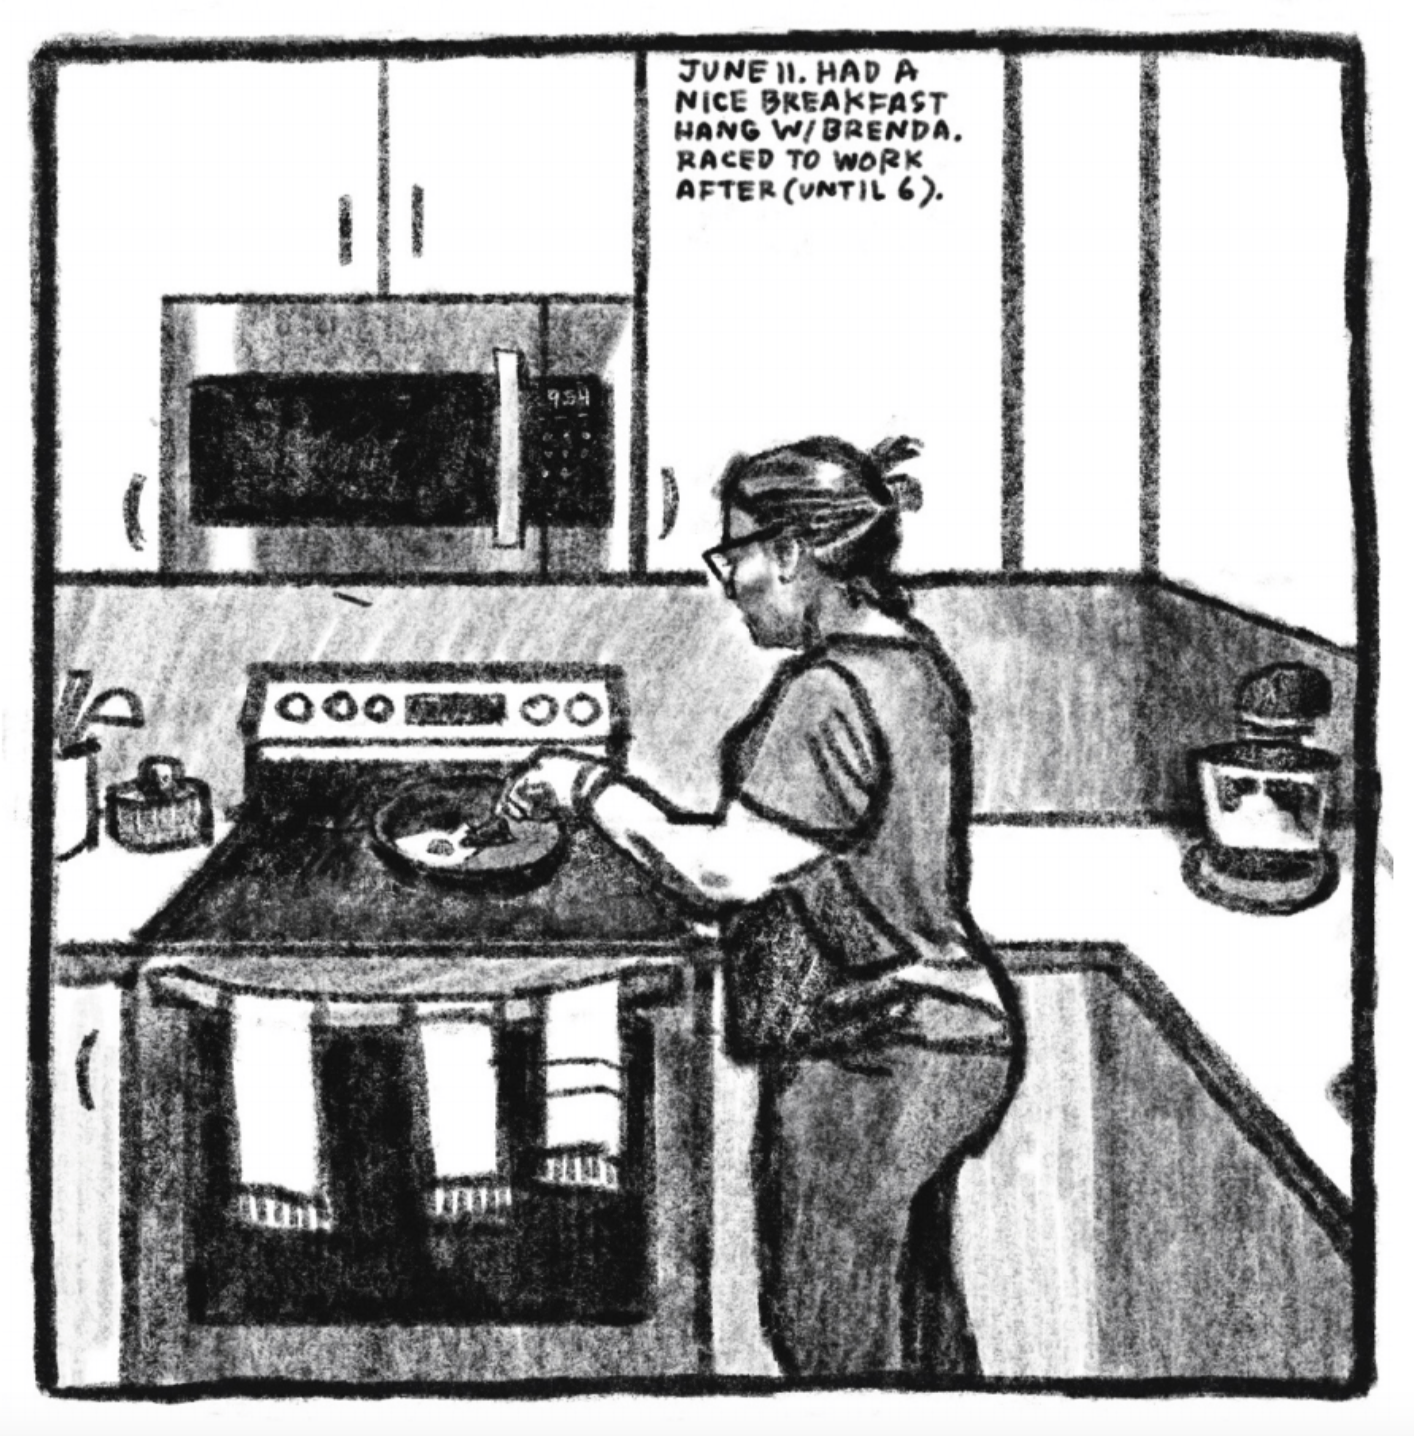 4. A woman stands at a kitchen stove frying an egg. She is wearing a short sleeve shirt and pants. Her hair is pulled back in a bun and she is wearing glasses. Three kitchen towels hang from the oven door handle. A microwave is installed in the white cabinets above the stove. â€œJune 11. Had a nice breakfast hang with Brenda. Raced to work after (until 6).â€